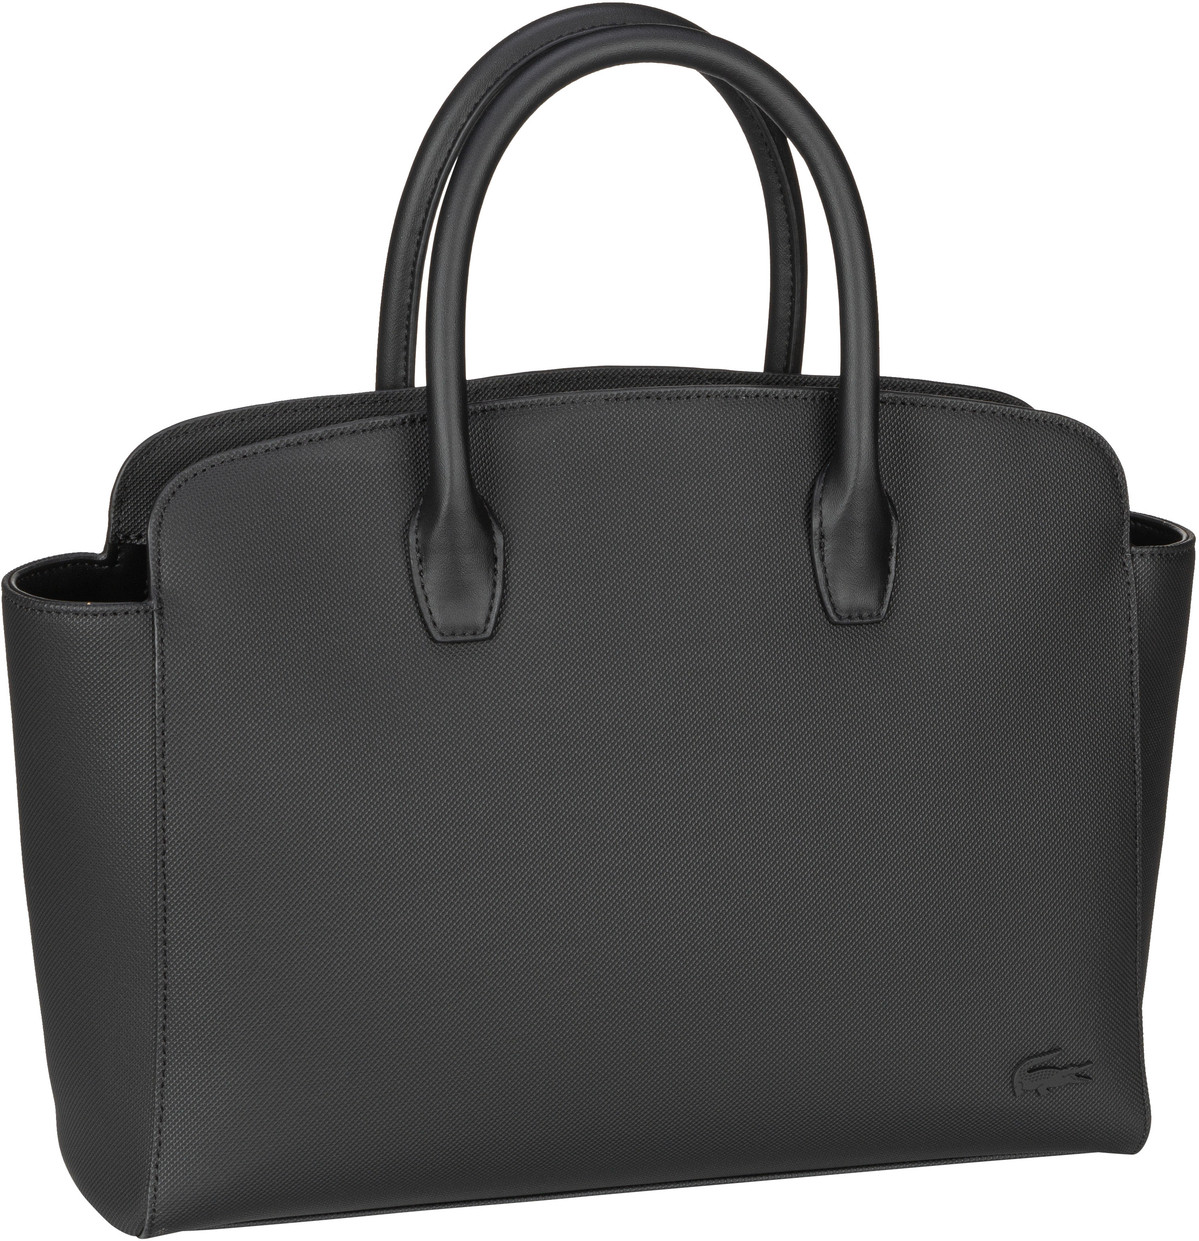 Lacoste Daily Lifestyle Top Handle Bag M 4092 - Black